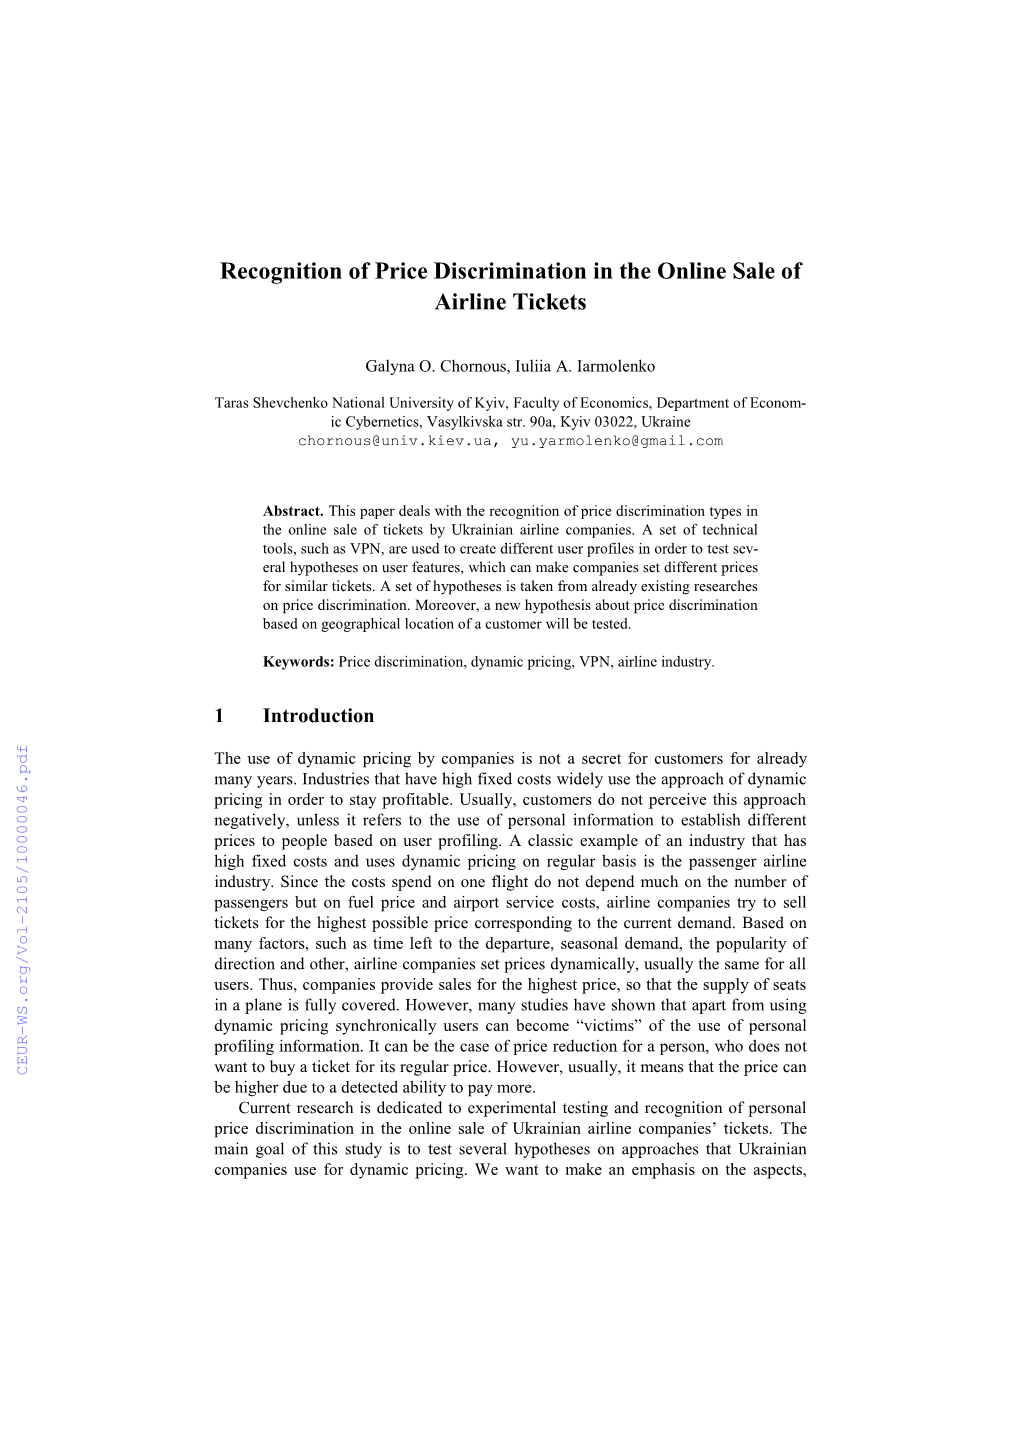 Recognition of Price Discrimination in the Online Sale of Airline Tickets